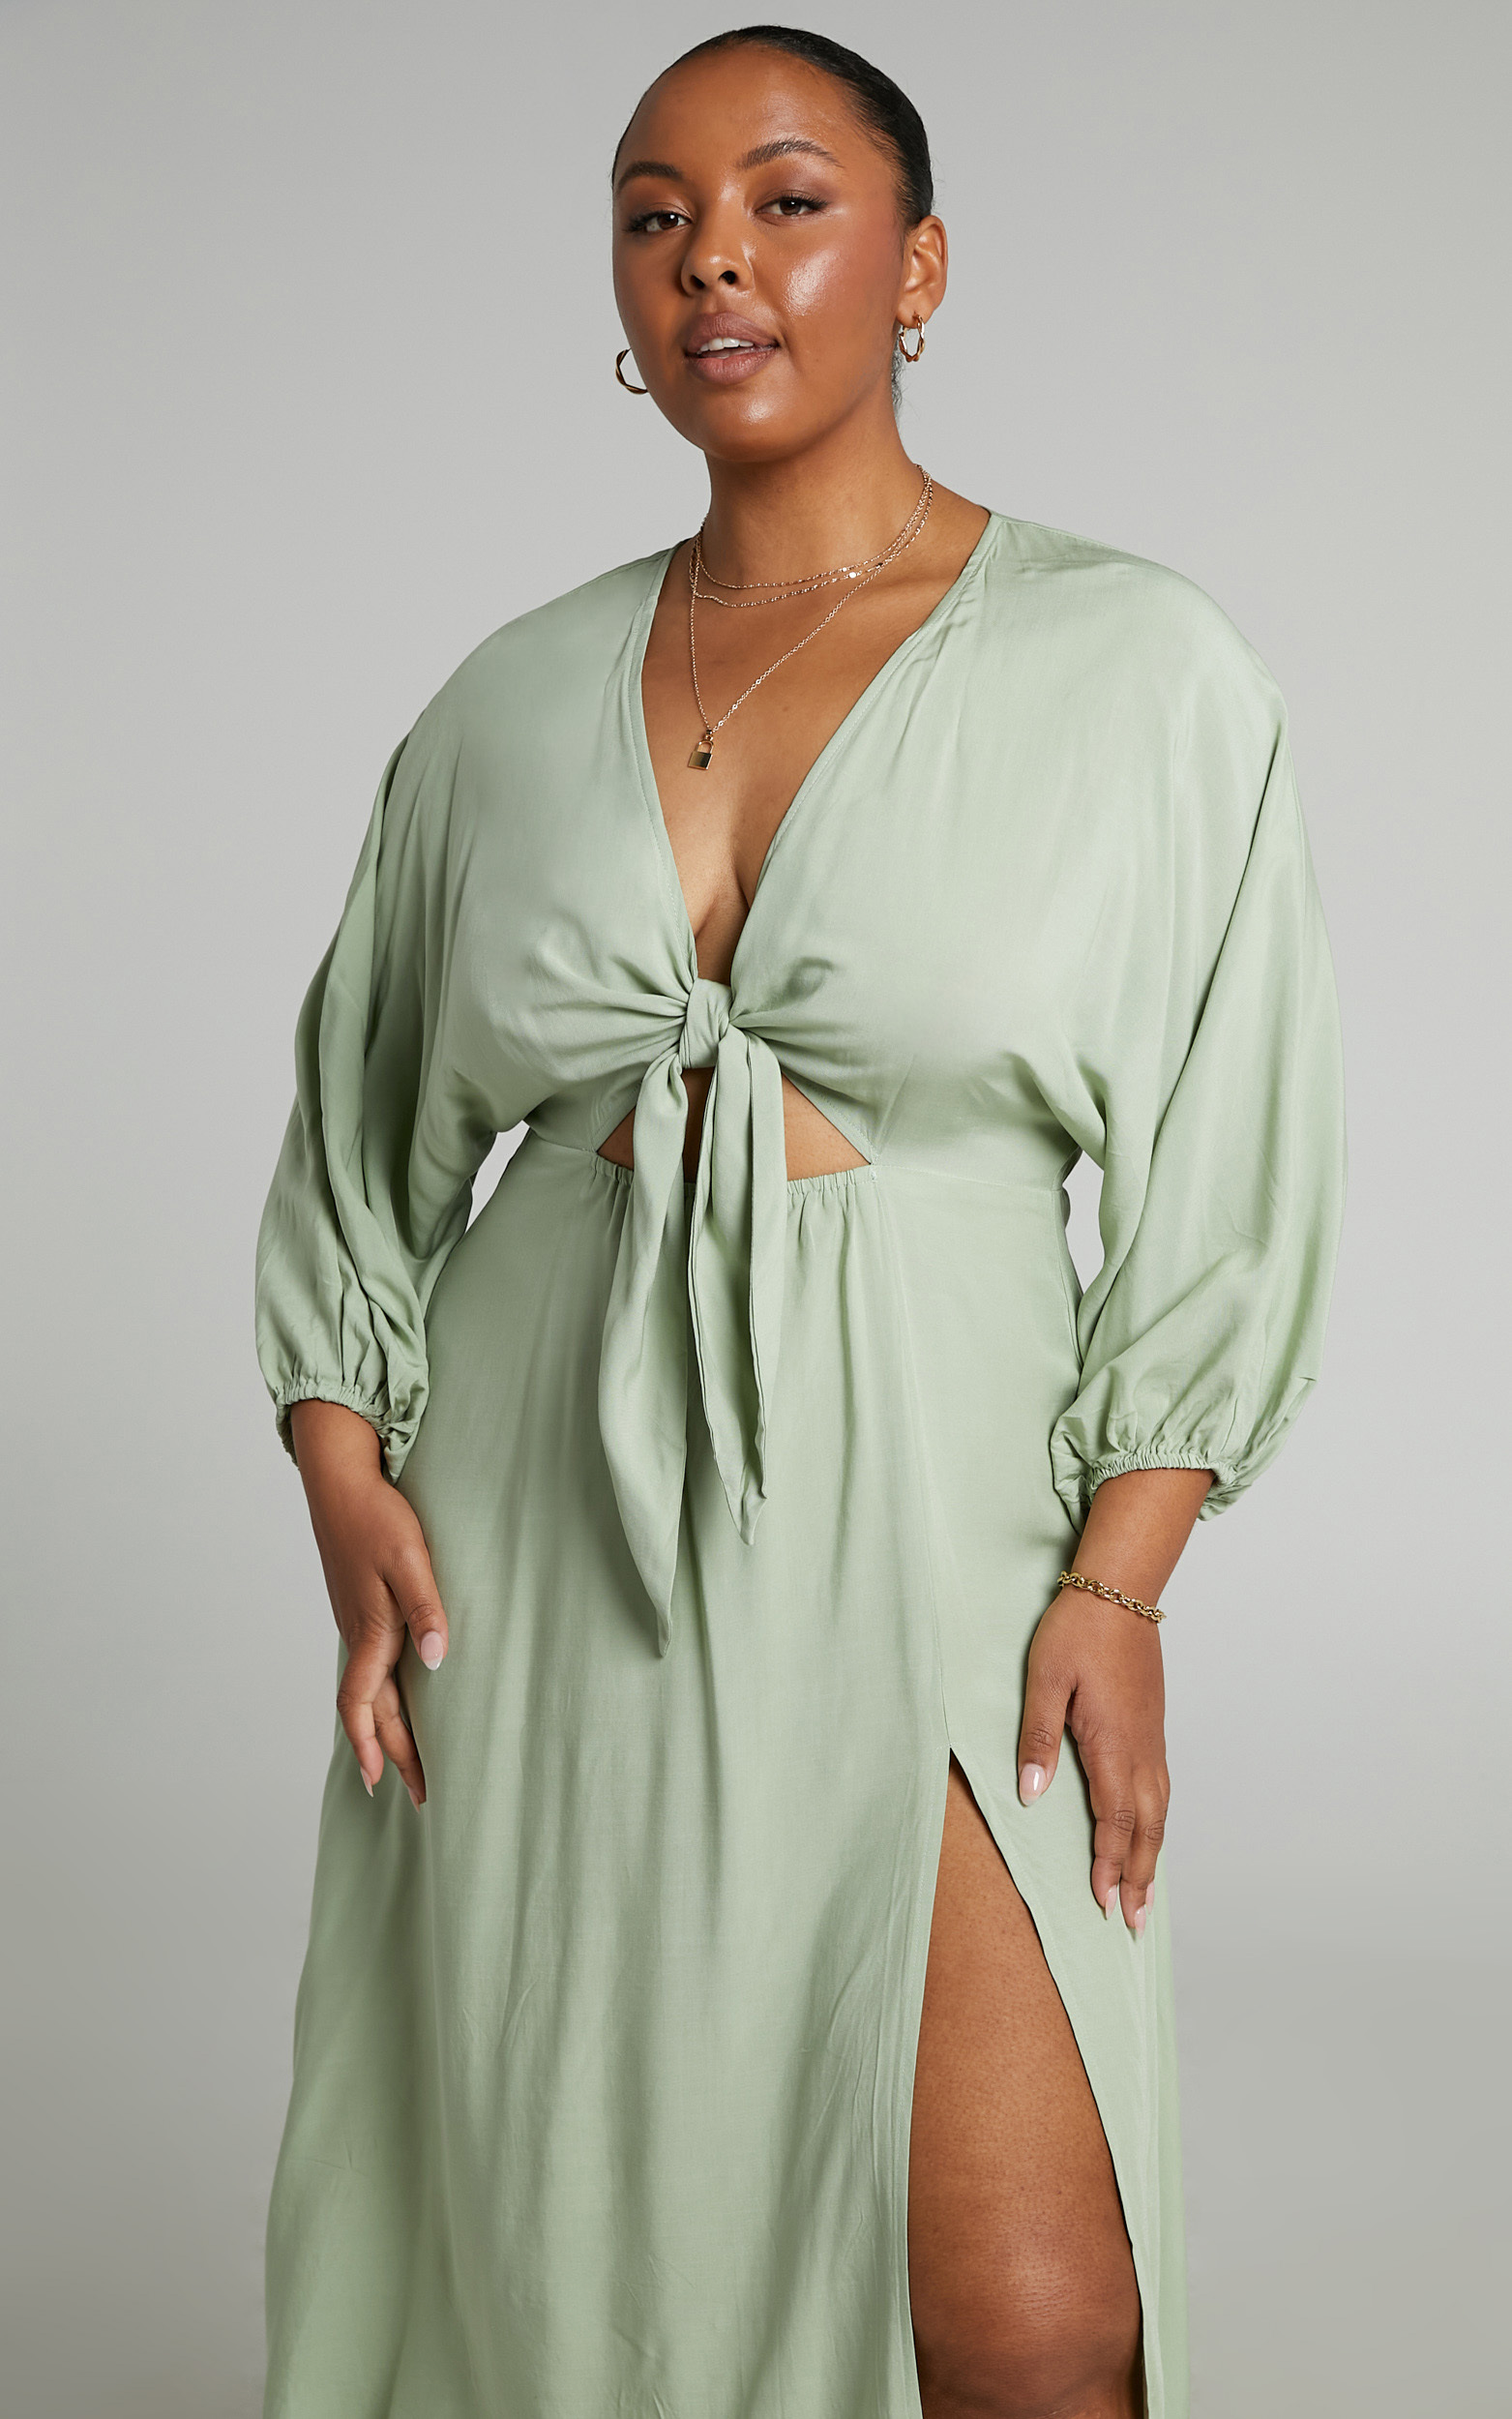 Tyricia Long Sleeve Tie Front Cut Out Midi Dress in Sage - 04, GRN1, hi-res image number null